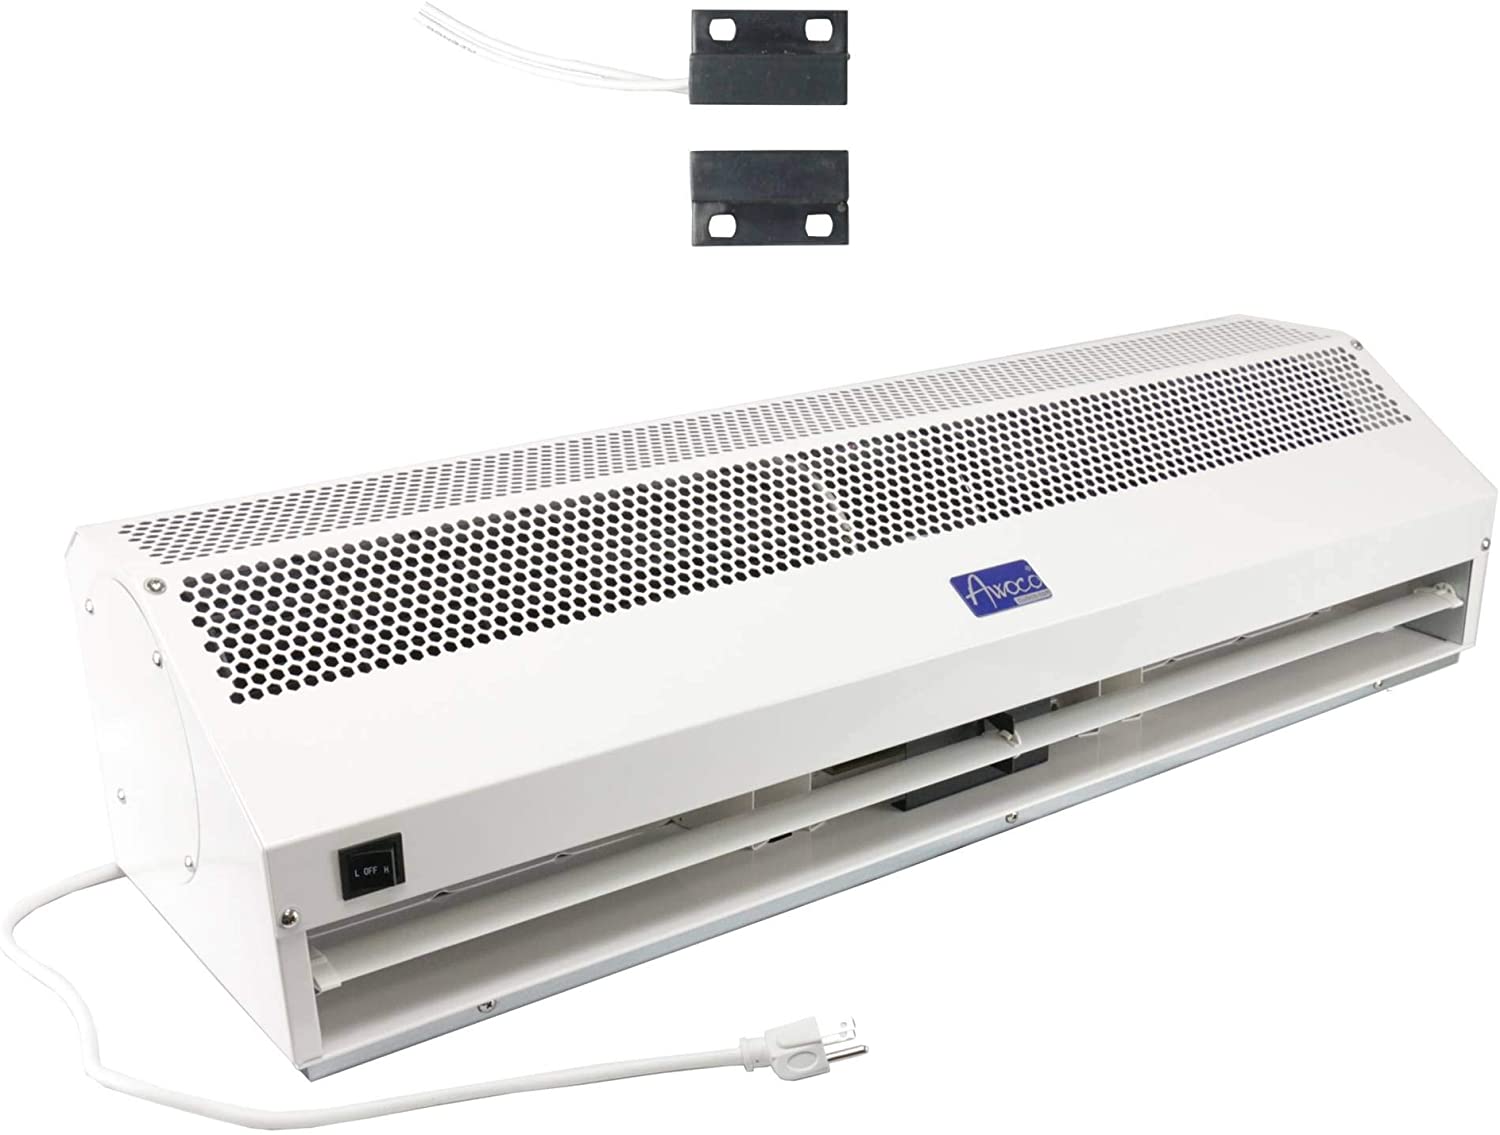 [Refurbished] Awoco FM1509-M 36” Super Power 2 Speeds 1200 CFM Commercial Indoor Air Curtain, UL Certified 120V Unheated, with an Easy-Install Magnetic Switch